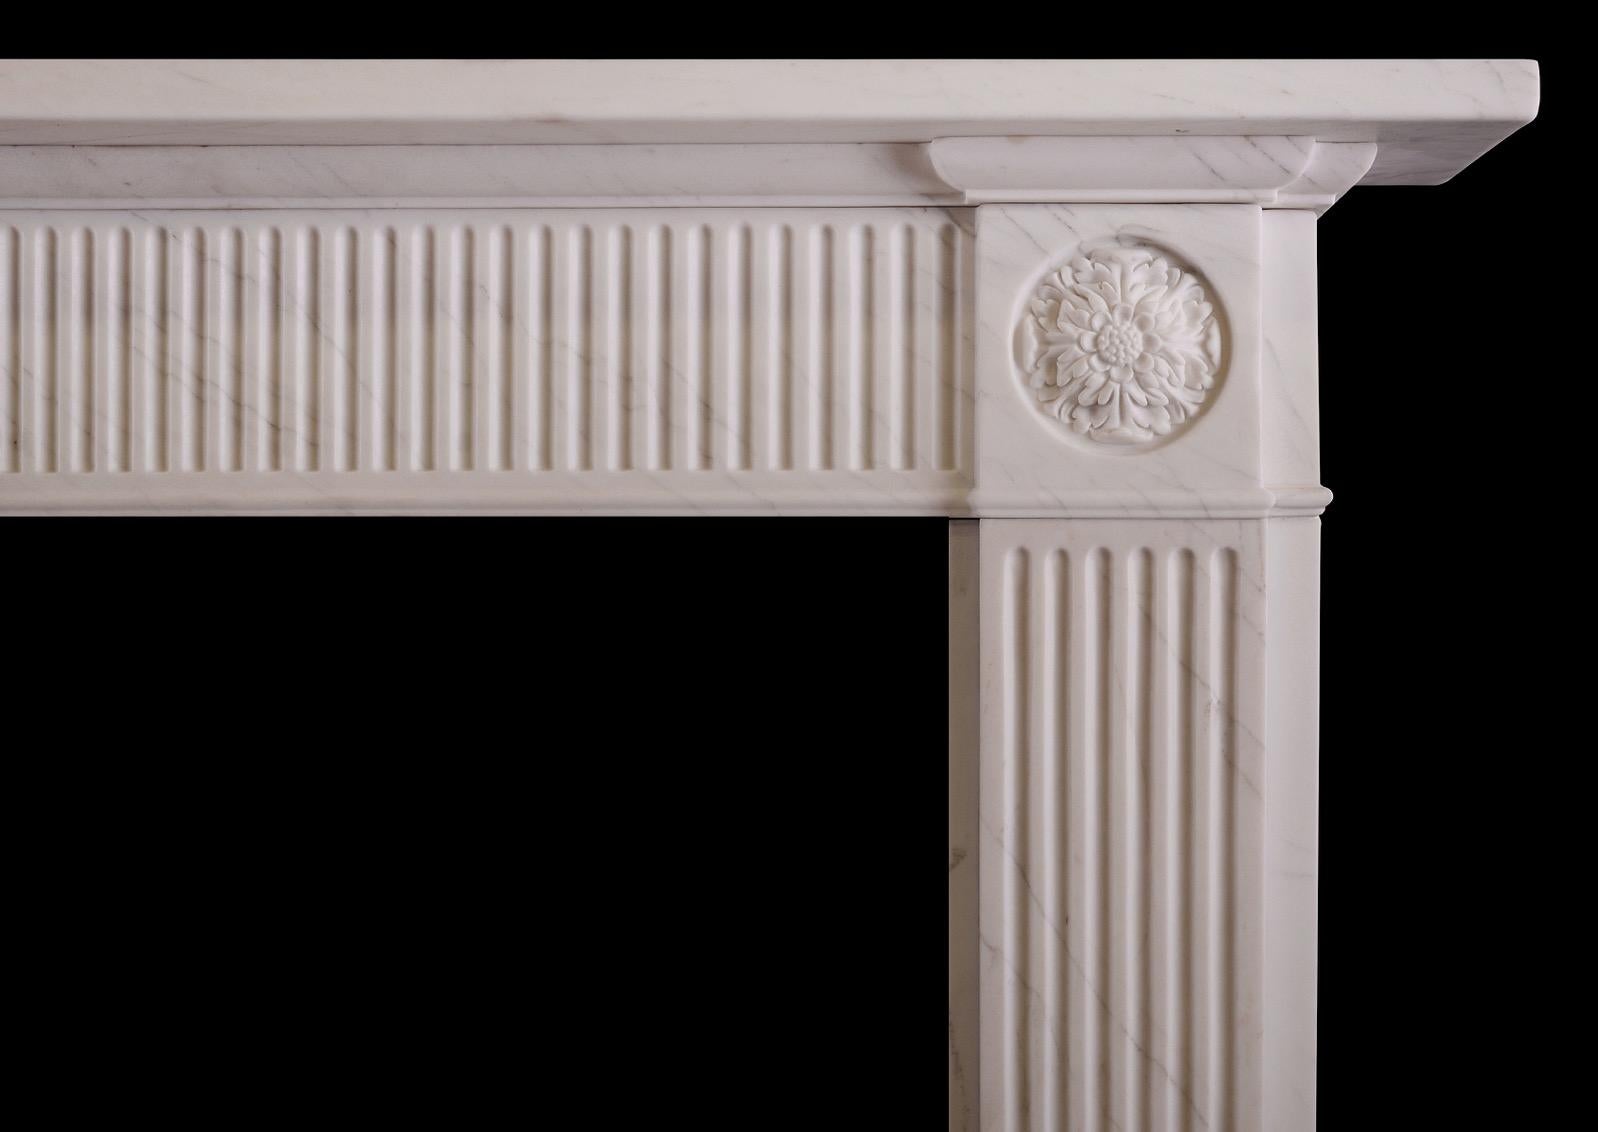 A simple yet elegant white marble fireplace in the Regency style. The fluted jambs surmounted by carved rosette paterae above. The frieze with flutes throughout. Moulded shelf above. English, modern.


Measures: Shelf width: 1534 mm / 60 5/8